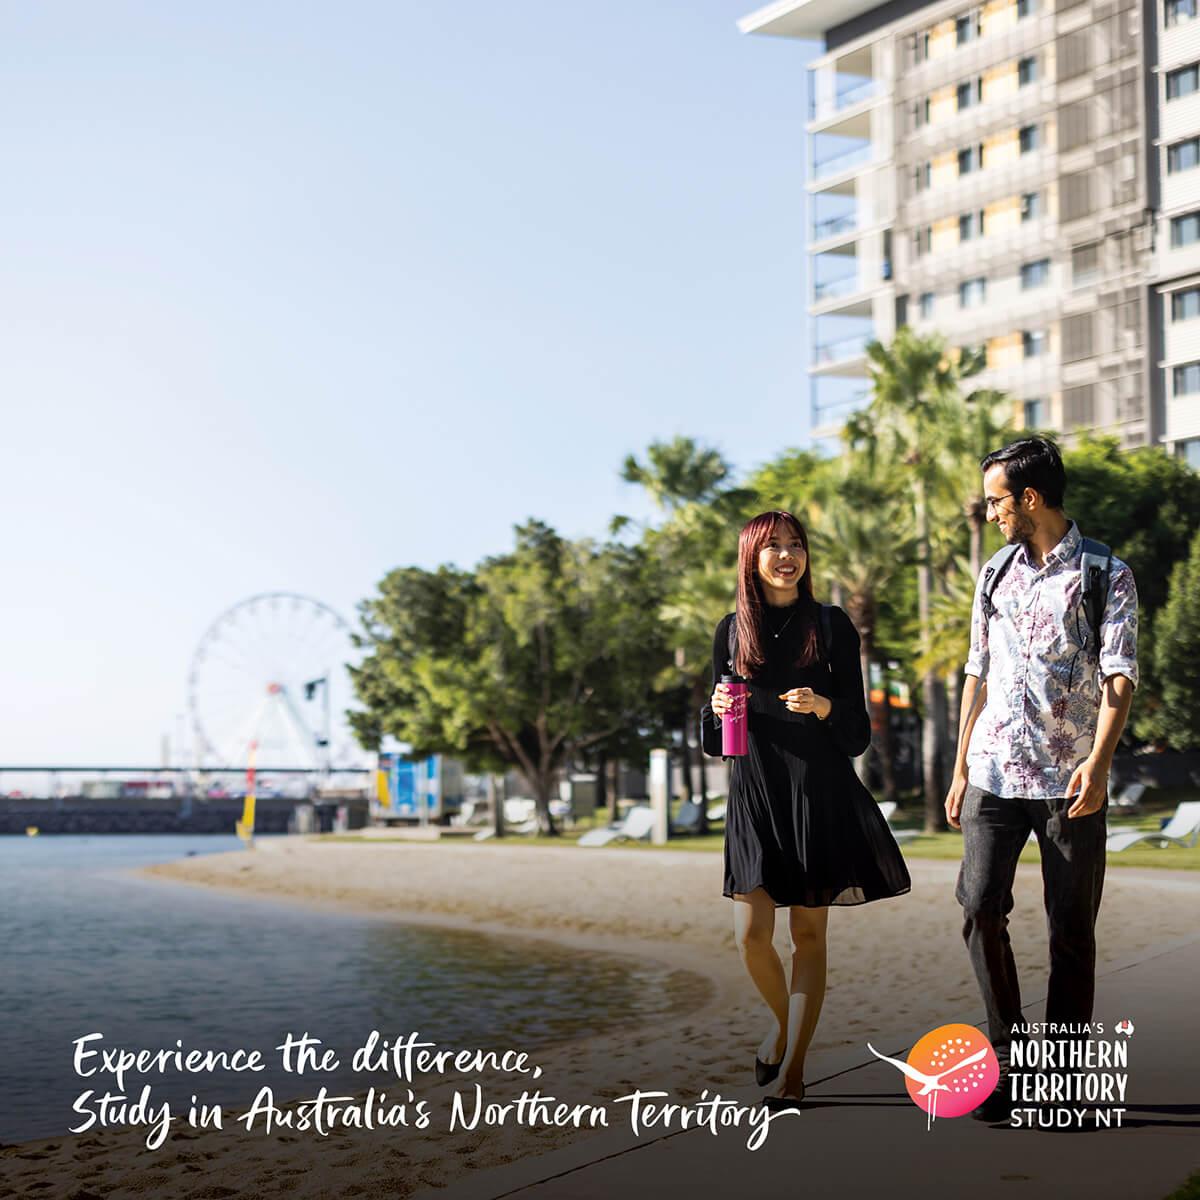 Experience the difference, study in Australia's Northern Territory